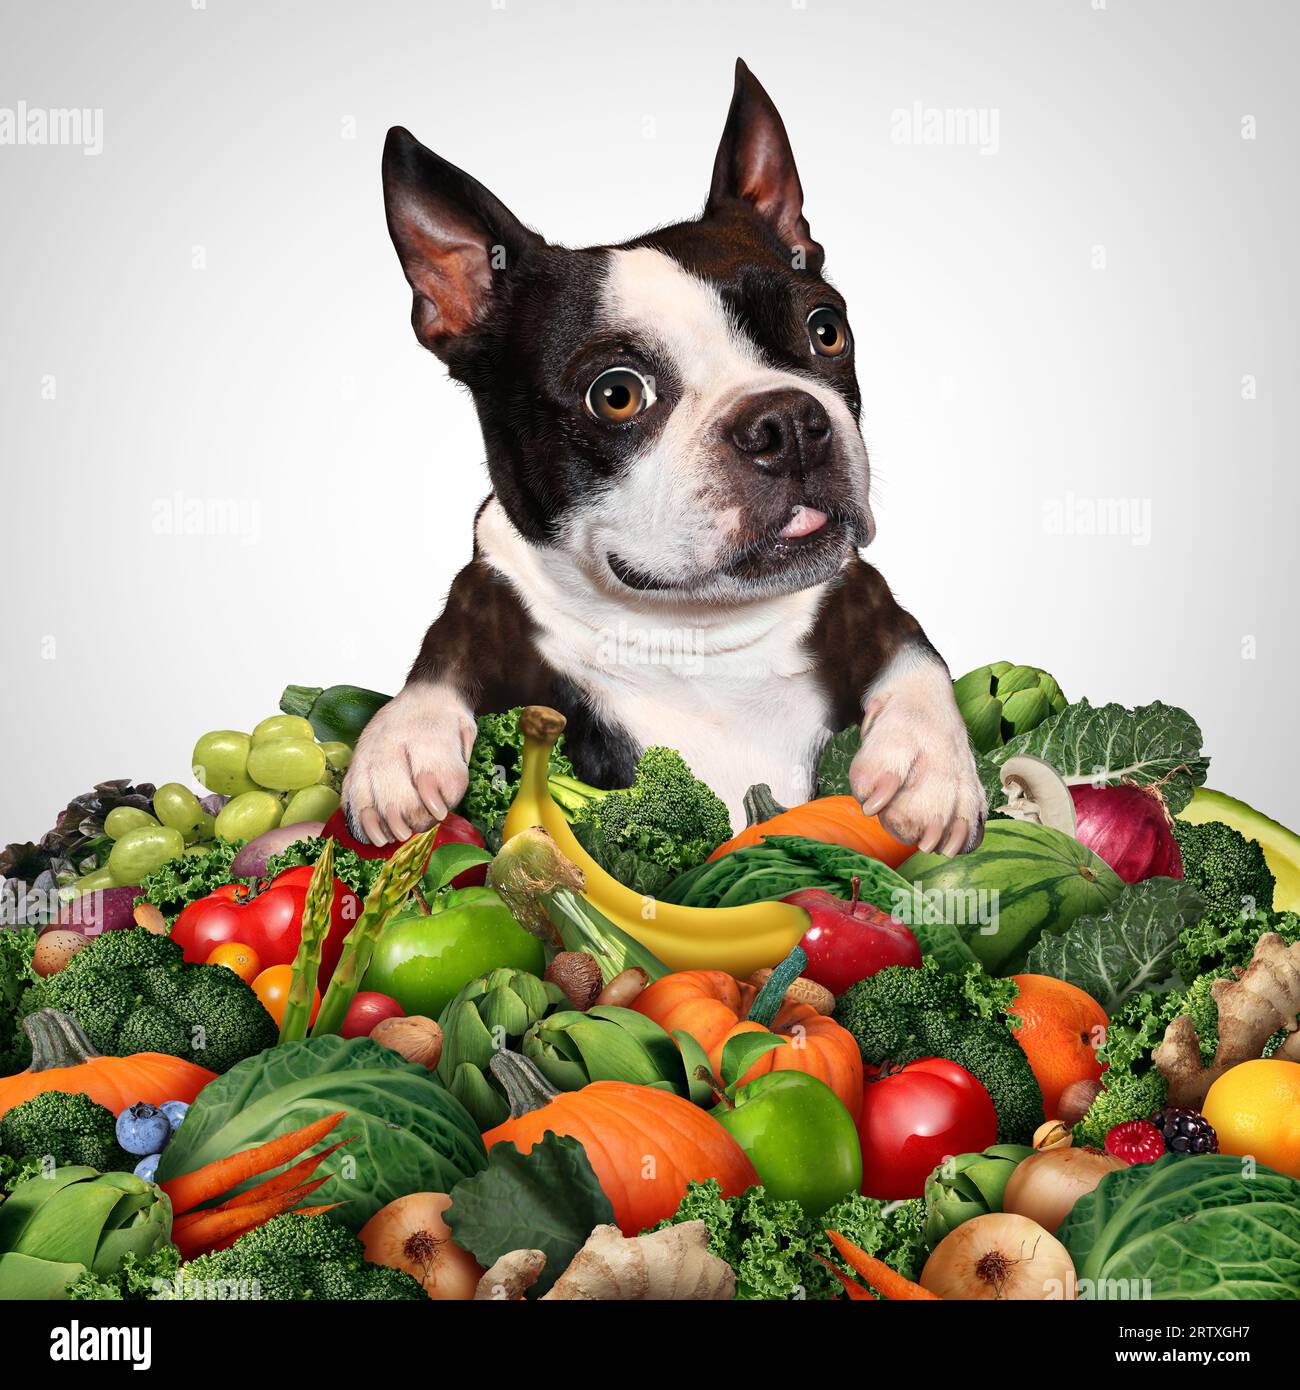 Vegetarian or Vegan dog Diet and canine vegetable and fruit Diet as health benefits for dogs eating fruits and vegetables as plant-based diets with gr Stock Photo